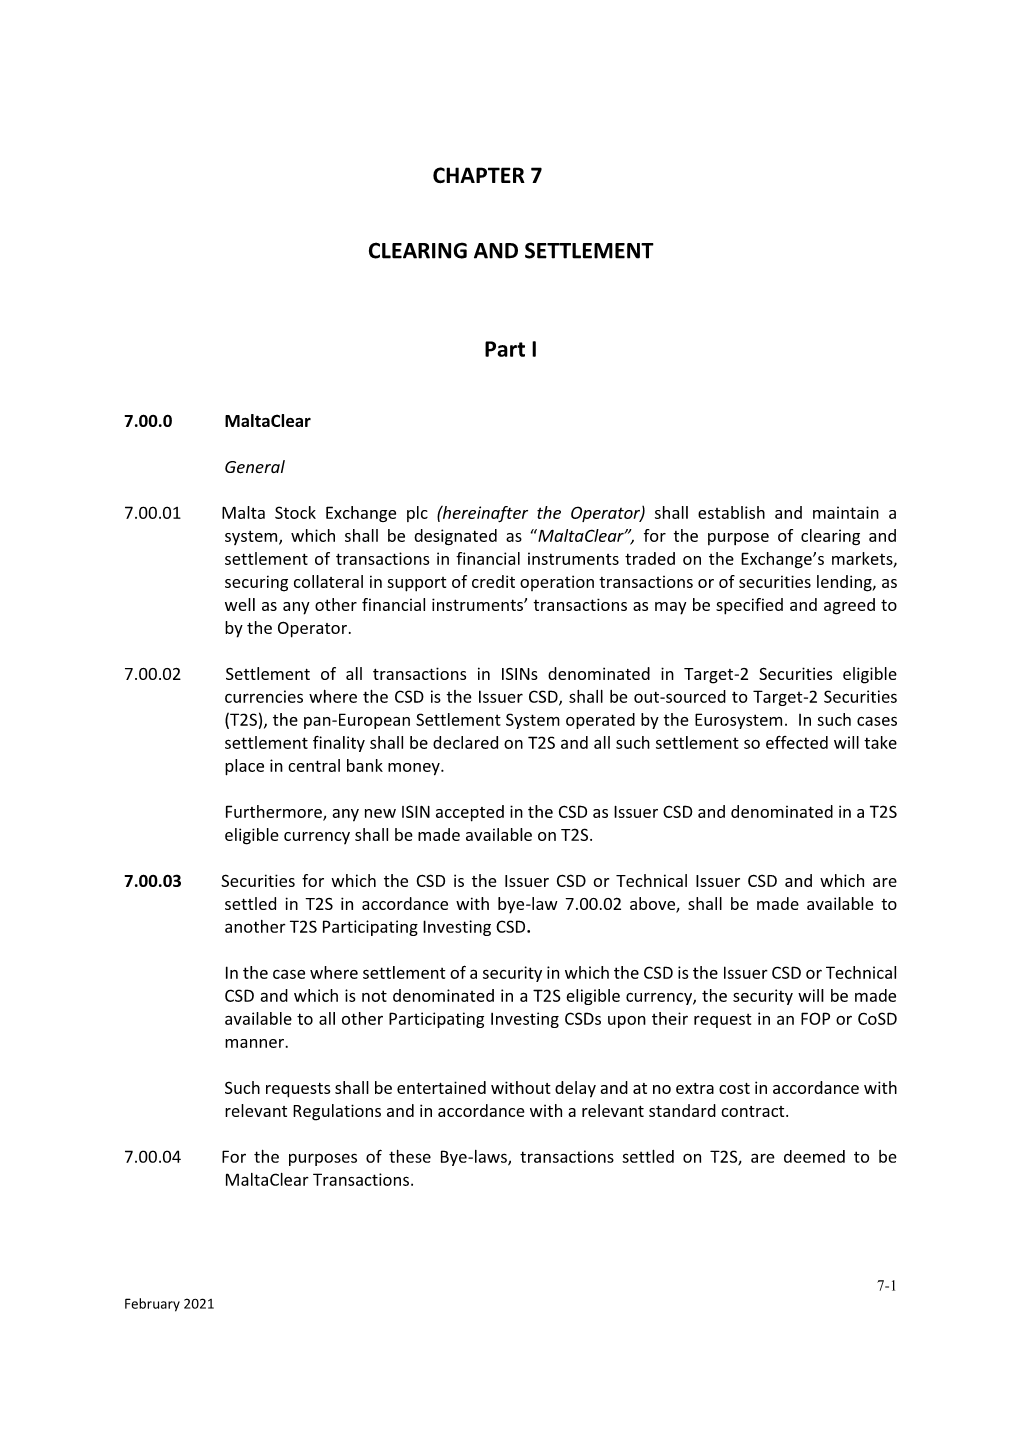 CHAPTER 7 CLEARING and SETTLEMENT Part I